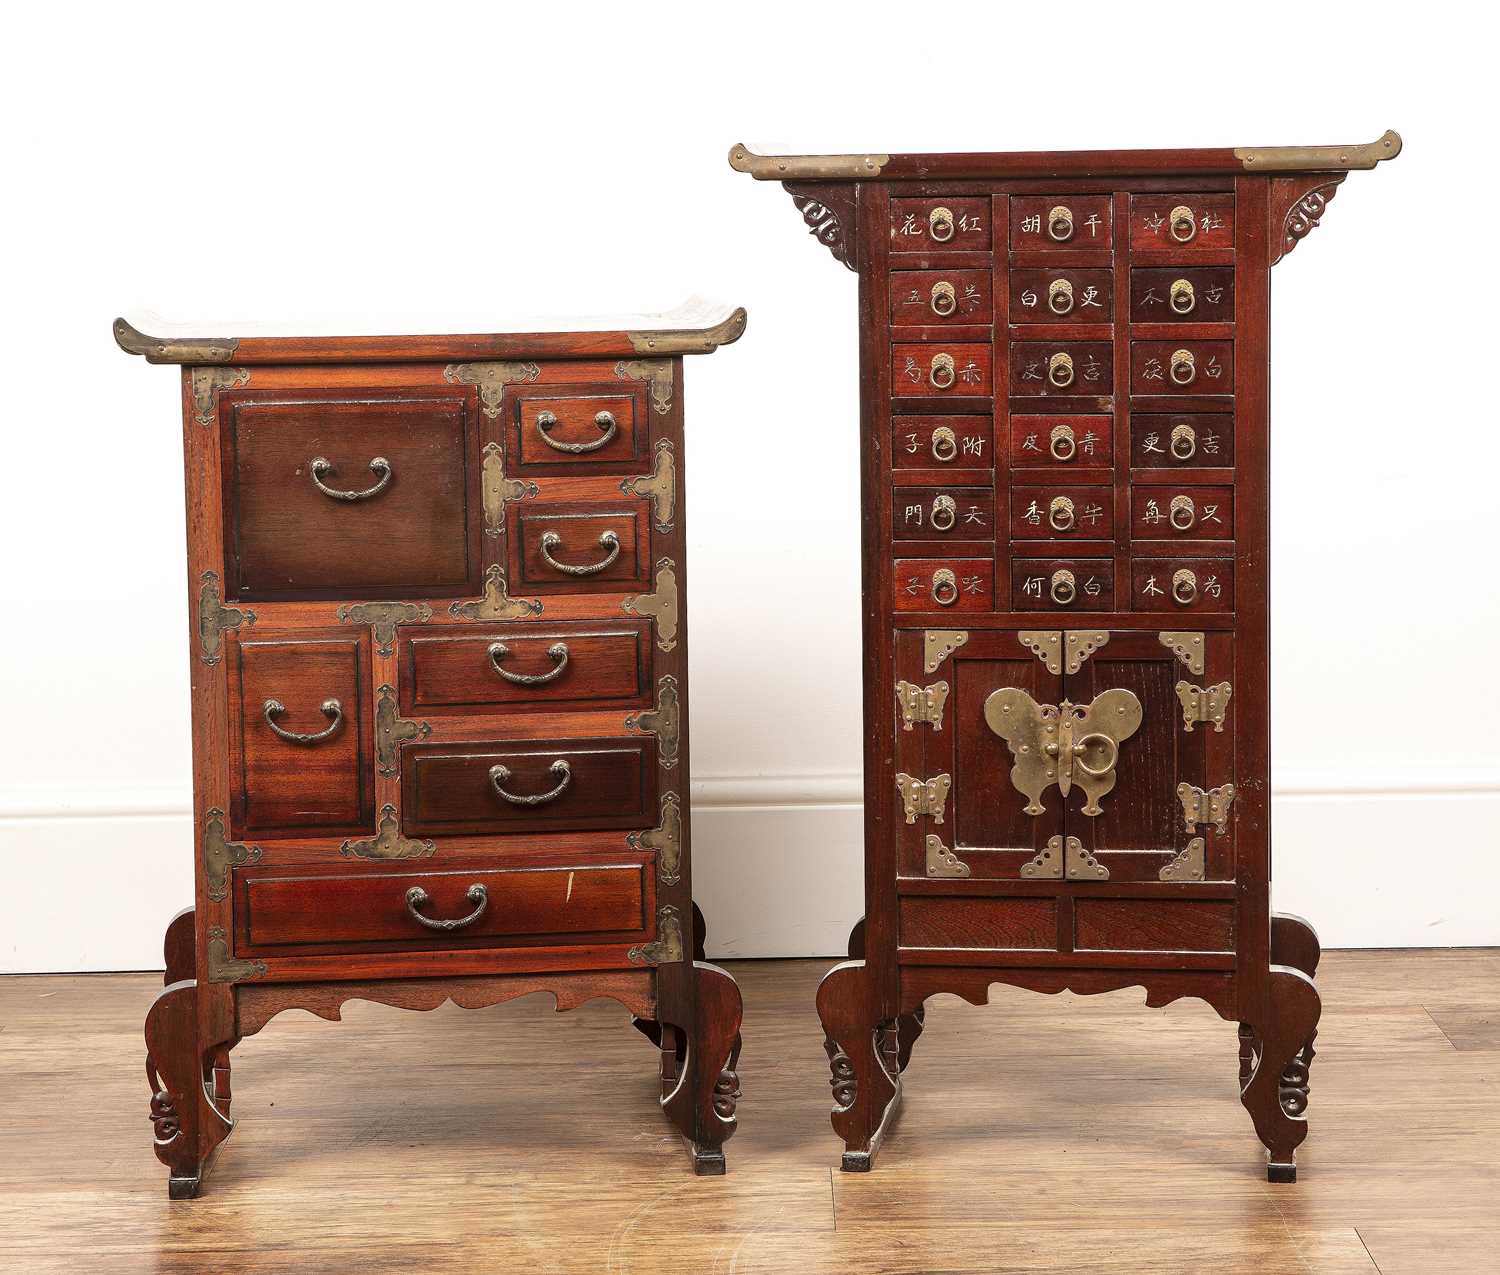 Two small sets of drawers Chinese, one 47cm wide x 75cm high x 25cm deep and the other 44.5cm wide x